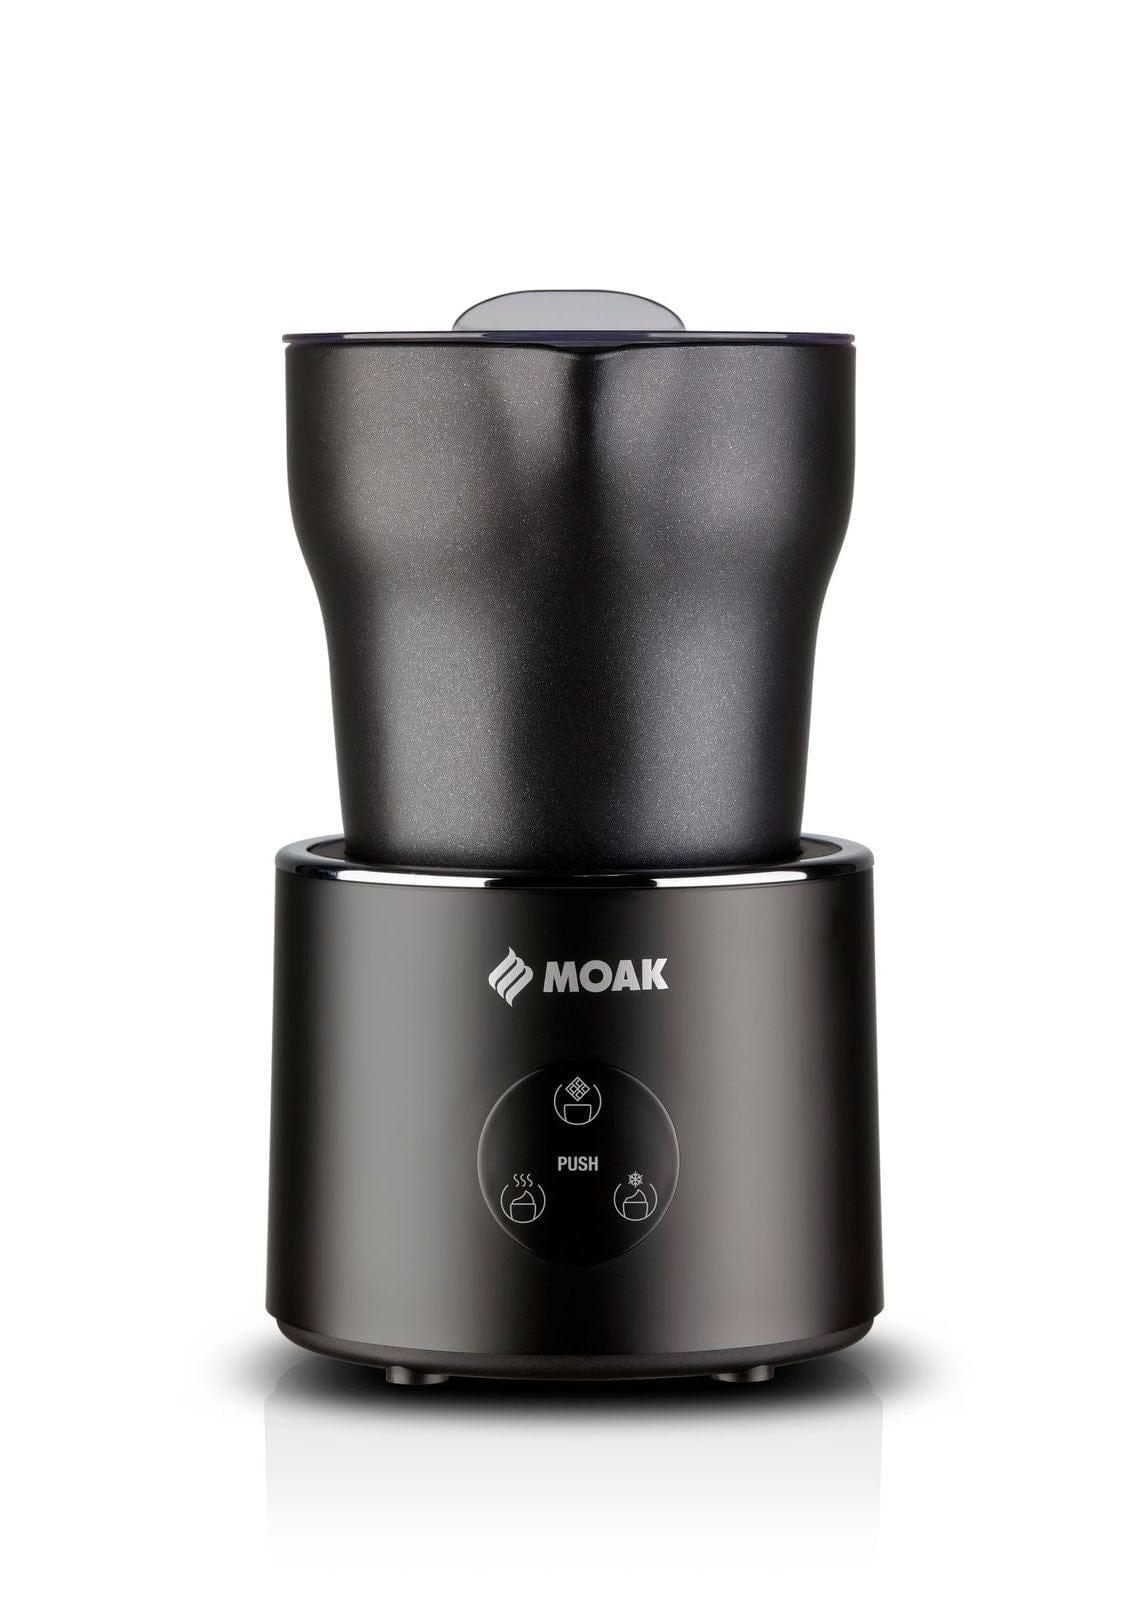 Moak Milk Frother" "Cappuccino Frothing" "Hot Chocolate Preparation"